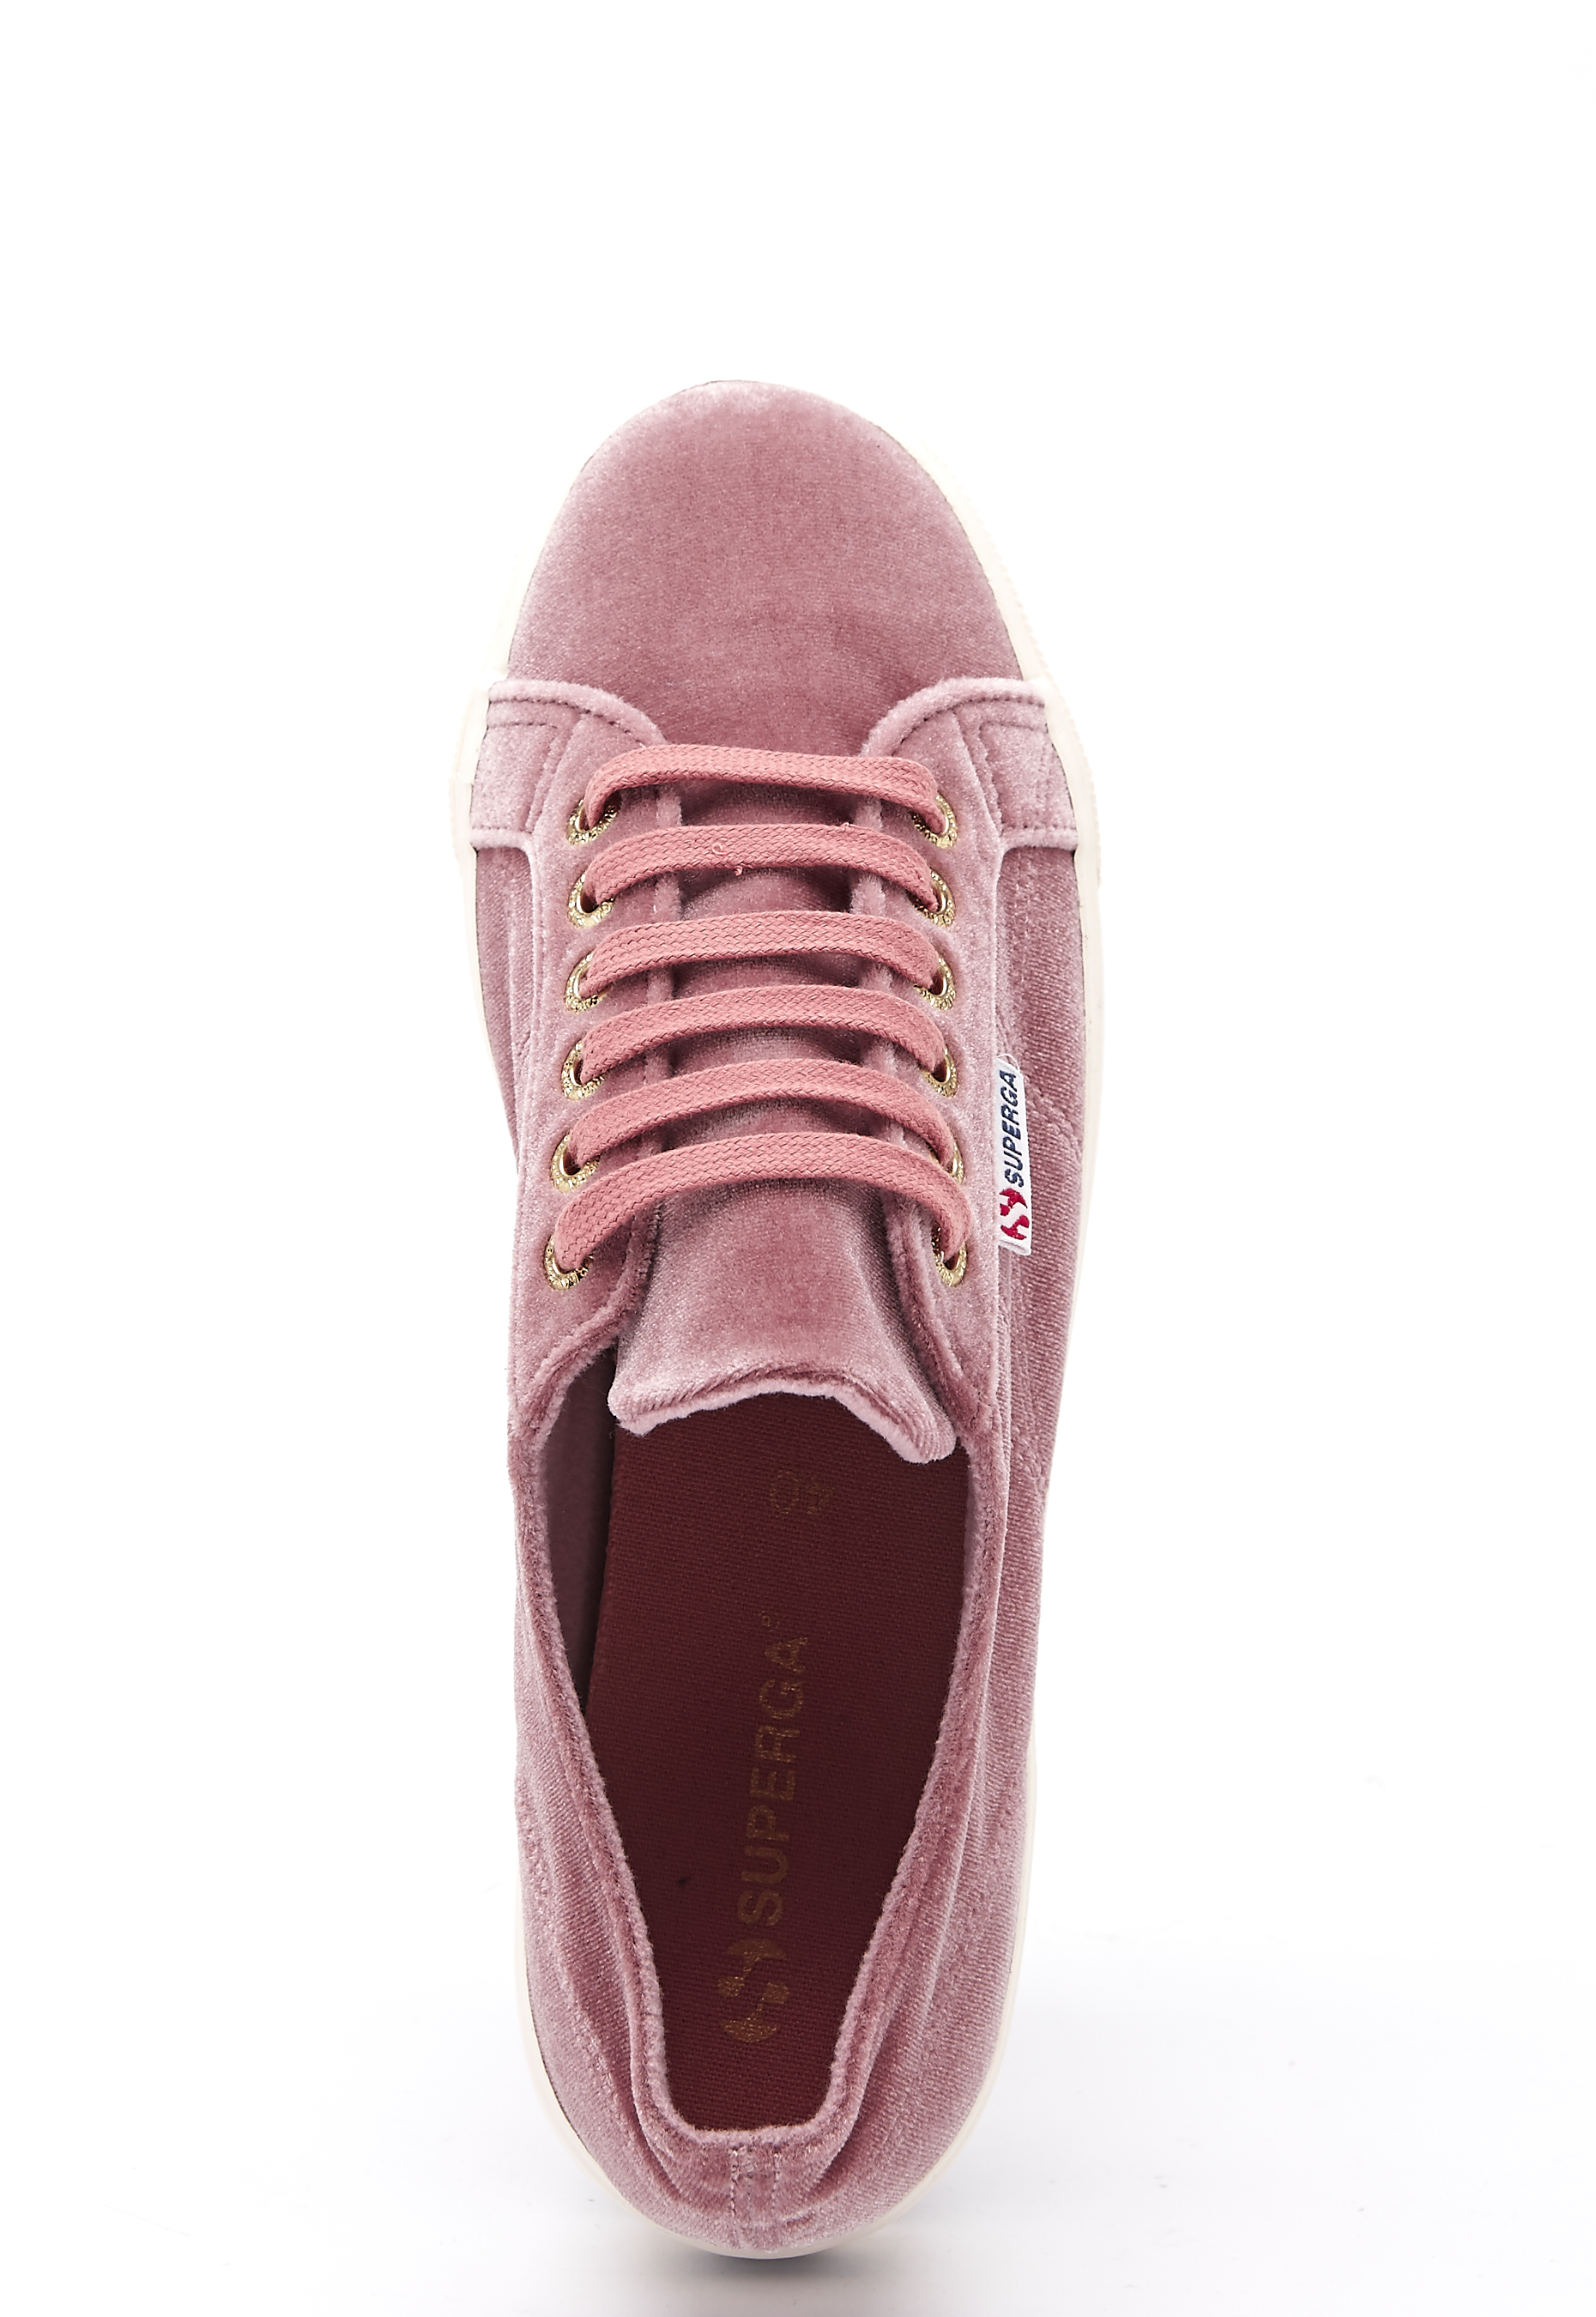 dusty rose tennis shoes